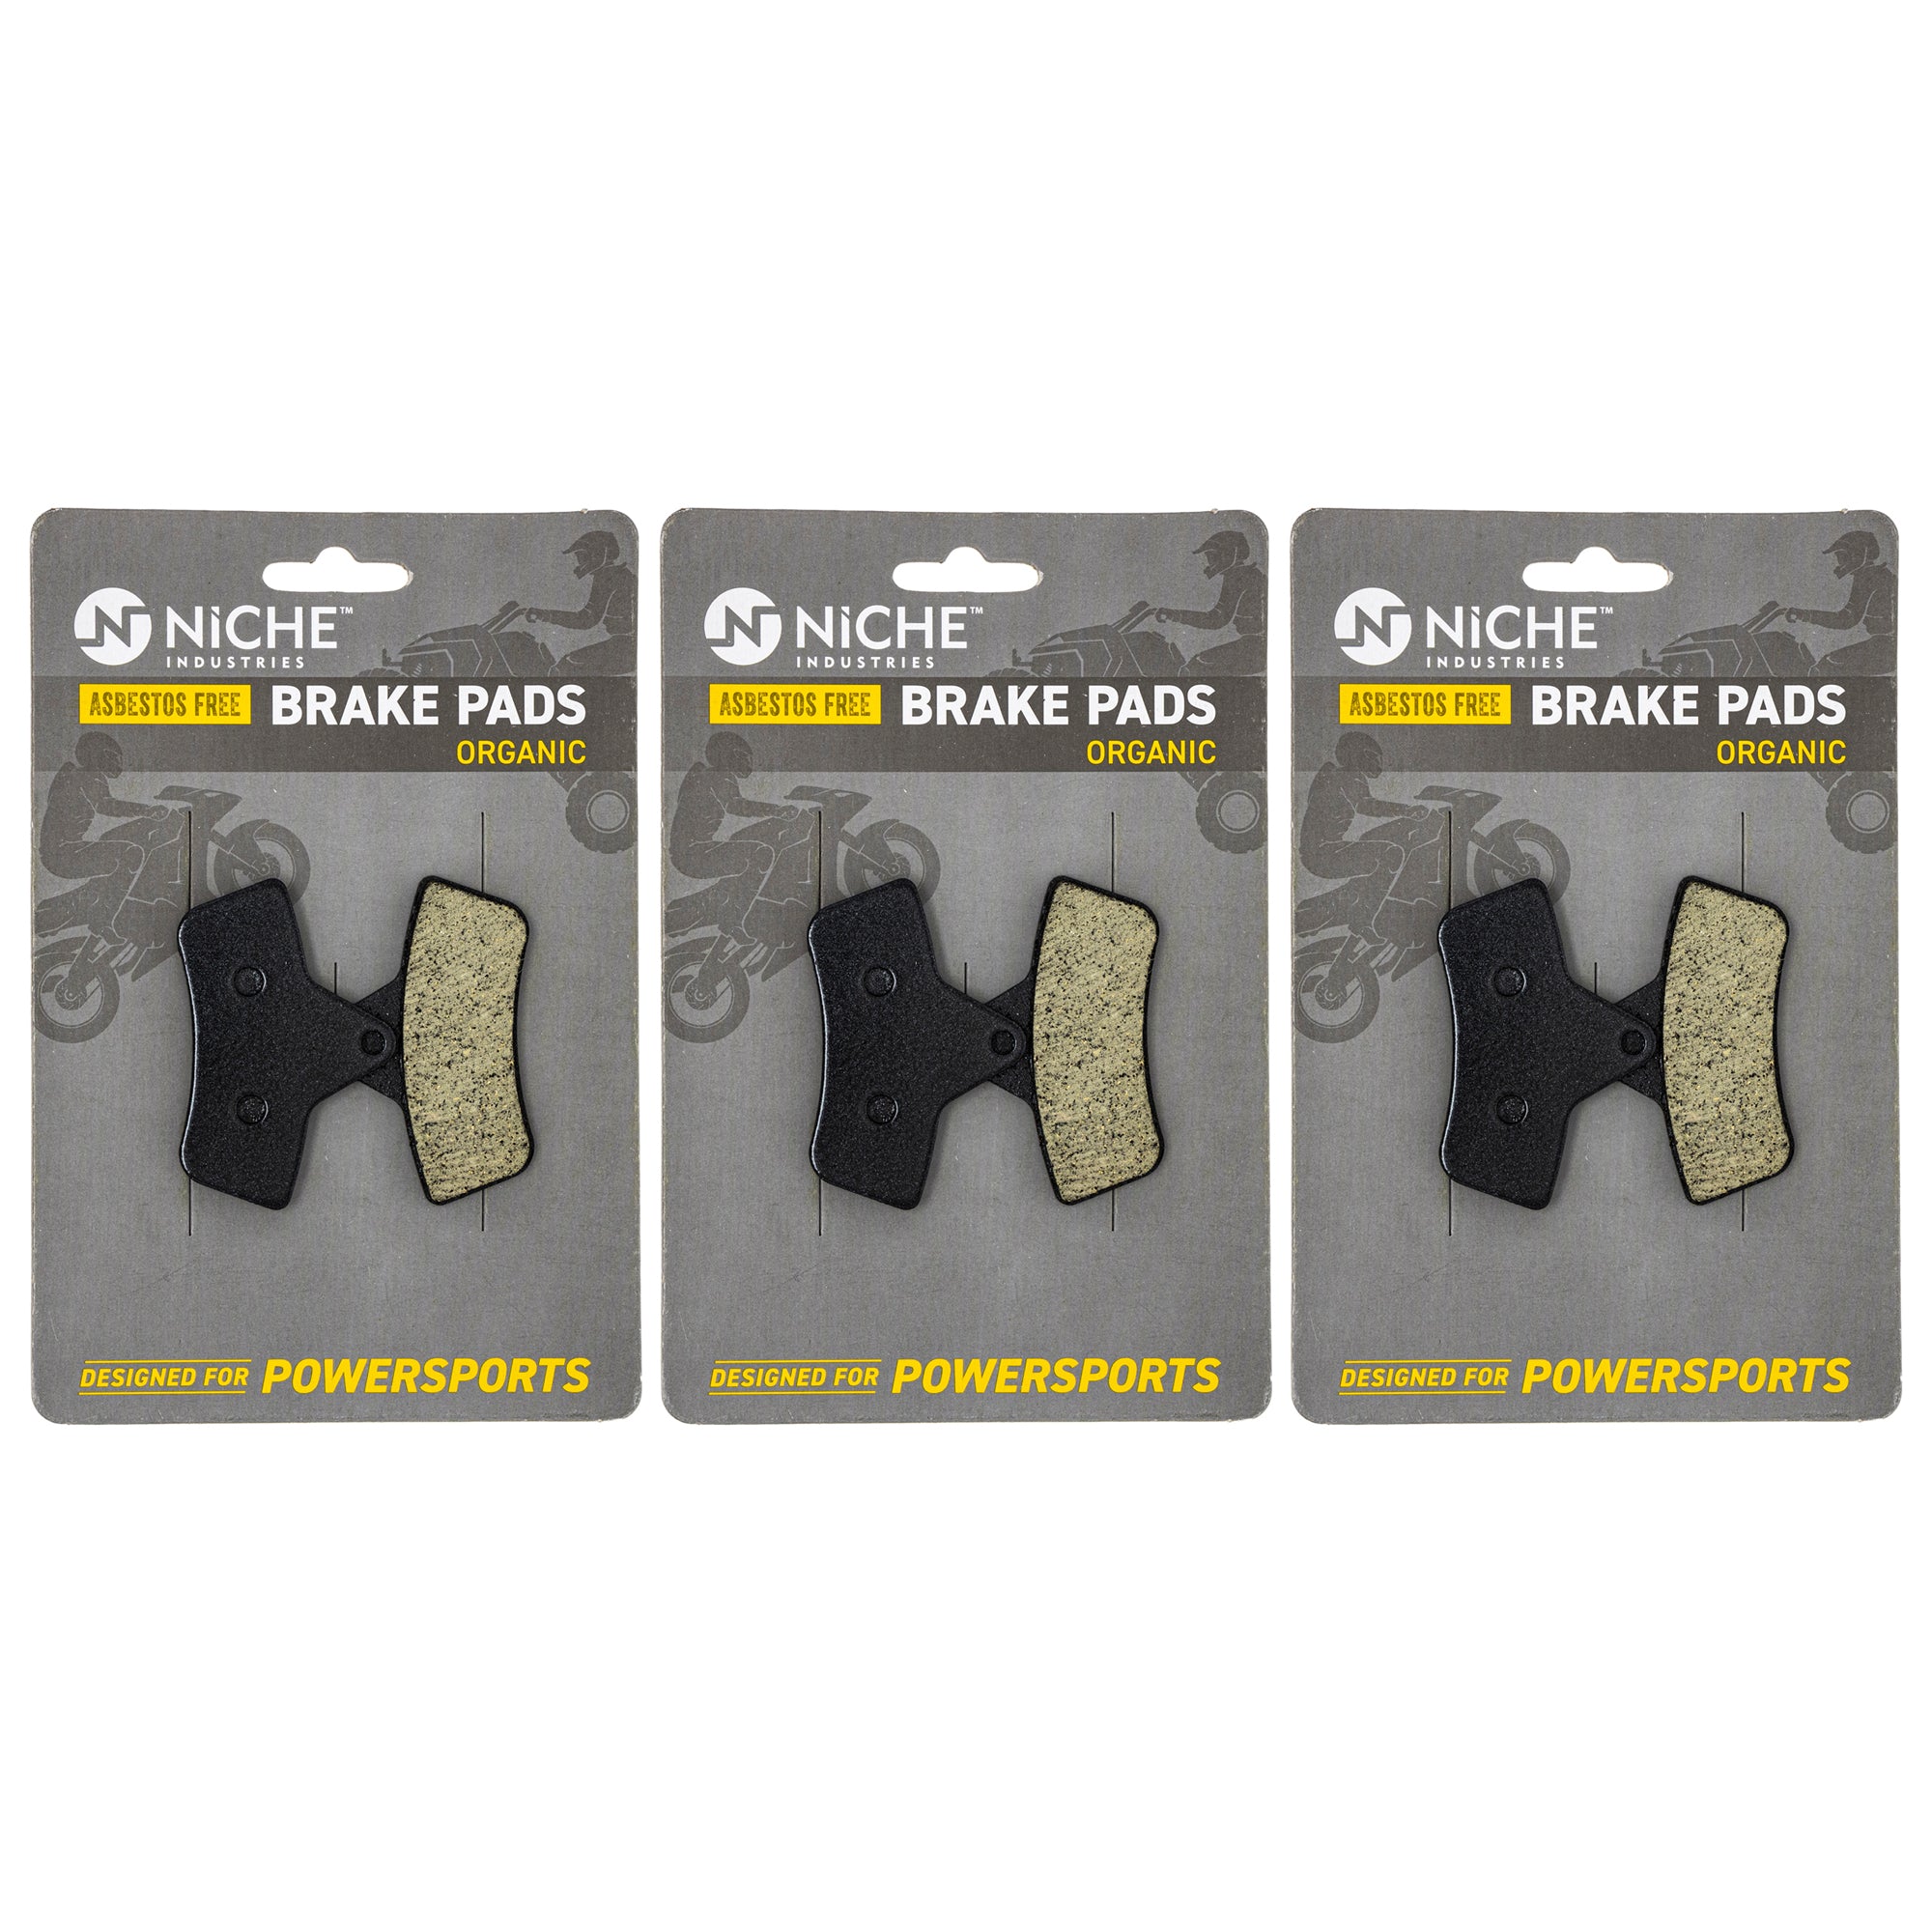 Brake Pad Set (Front & Rear) 3-Pack for Arctic Cat Textron Cat 0402-882 1402-126 0502-019 NICHE 519-KPA2292D